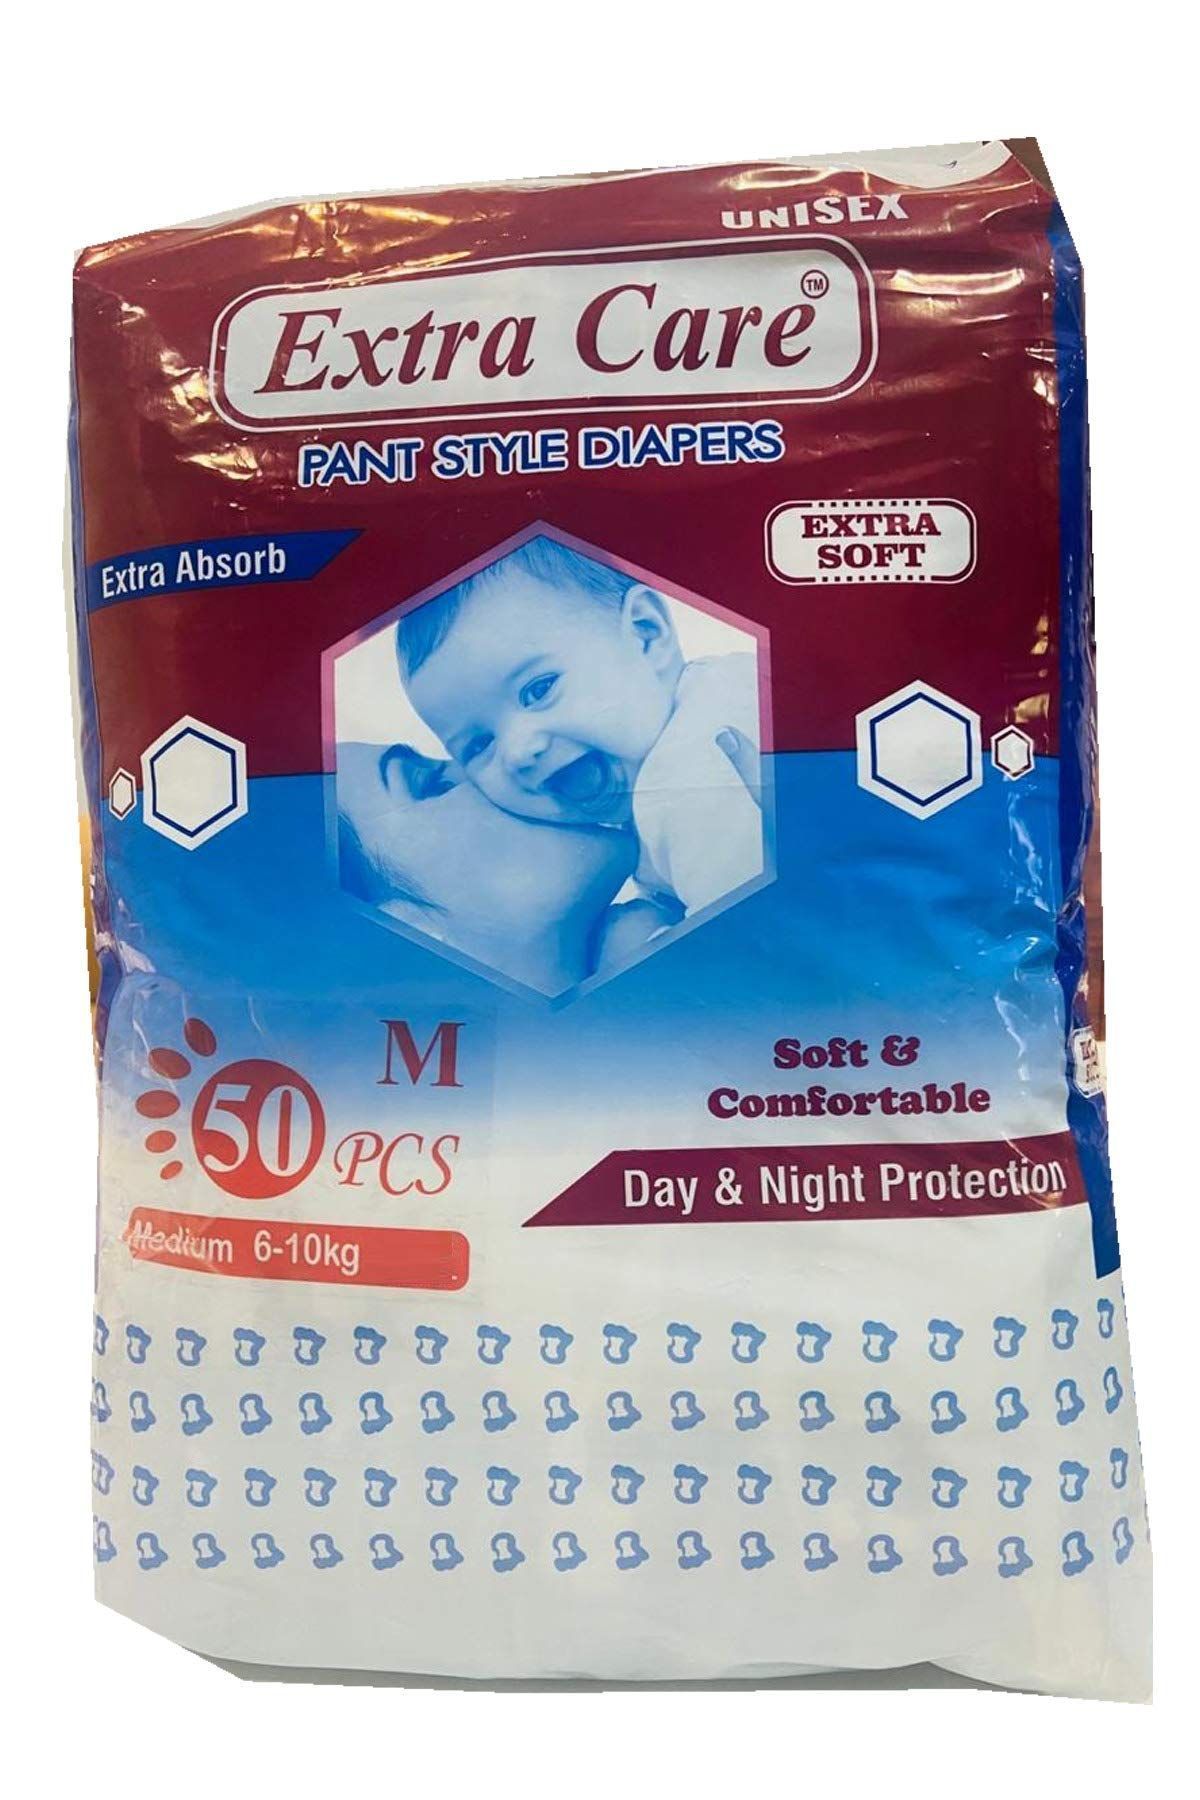 Extra Care Extra Absorb Pants Style Baby Diapers - 50 Count Medium |  Leakage Protection, Rush-Free